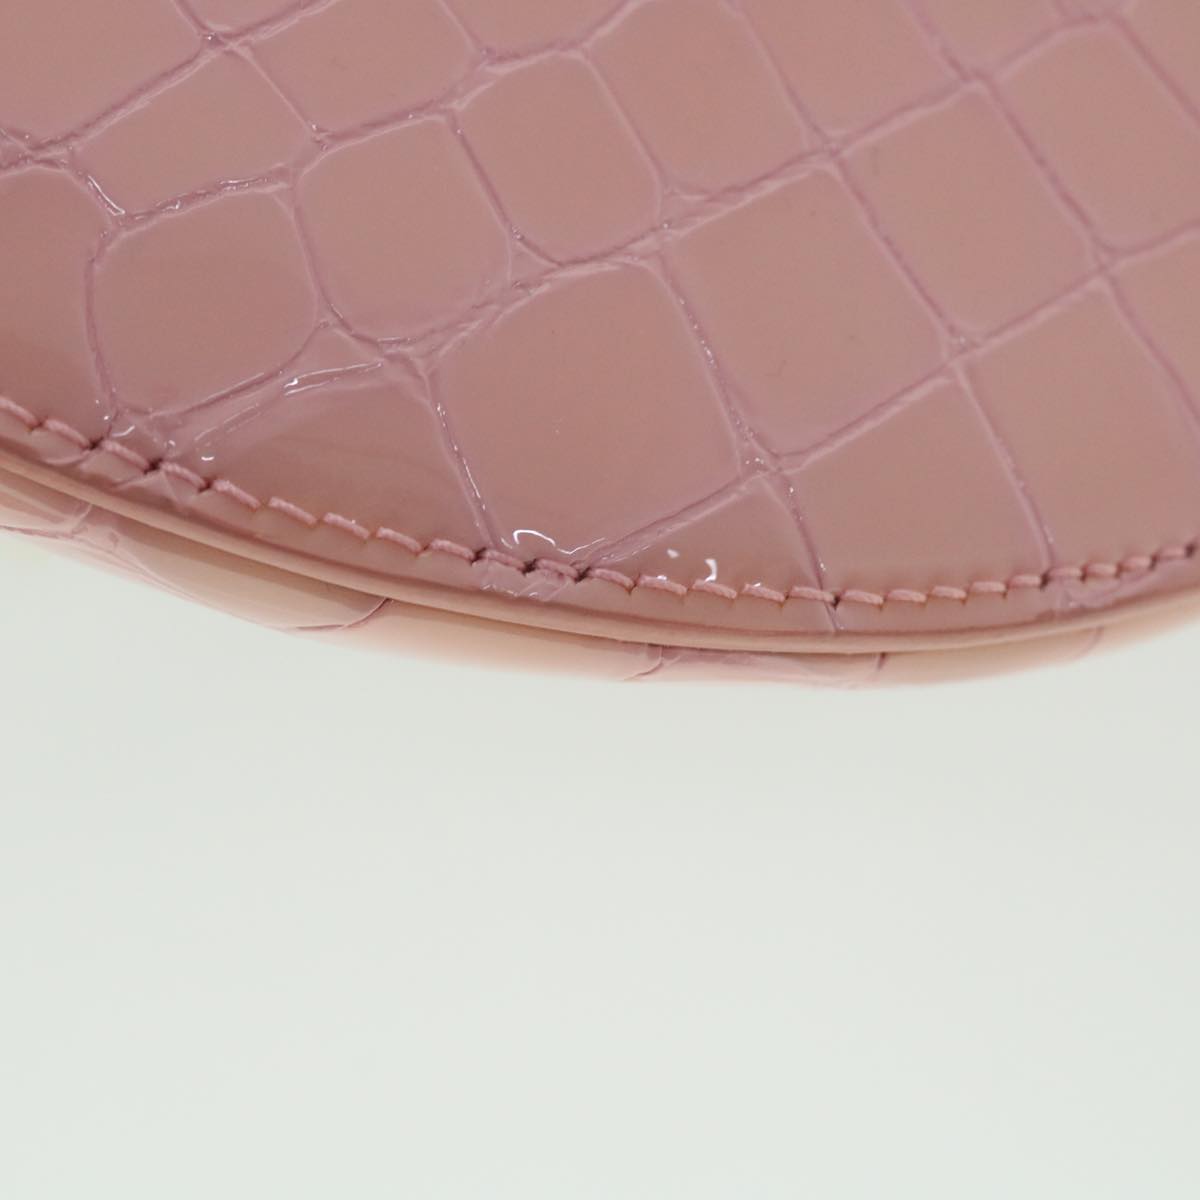 Balenciaga Croco Embossed Body Bag Leather Pink Auth 54195